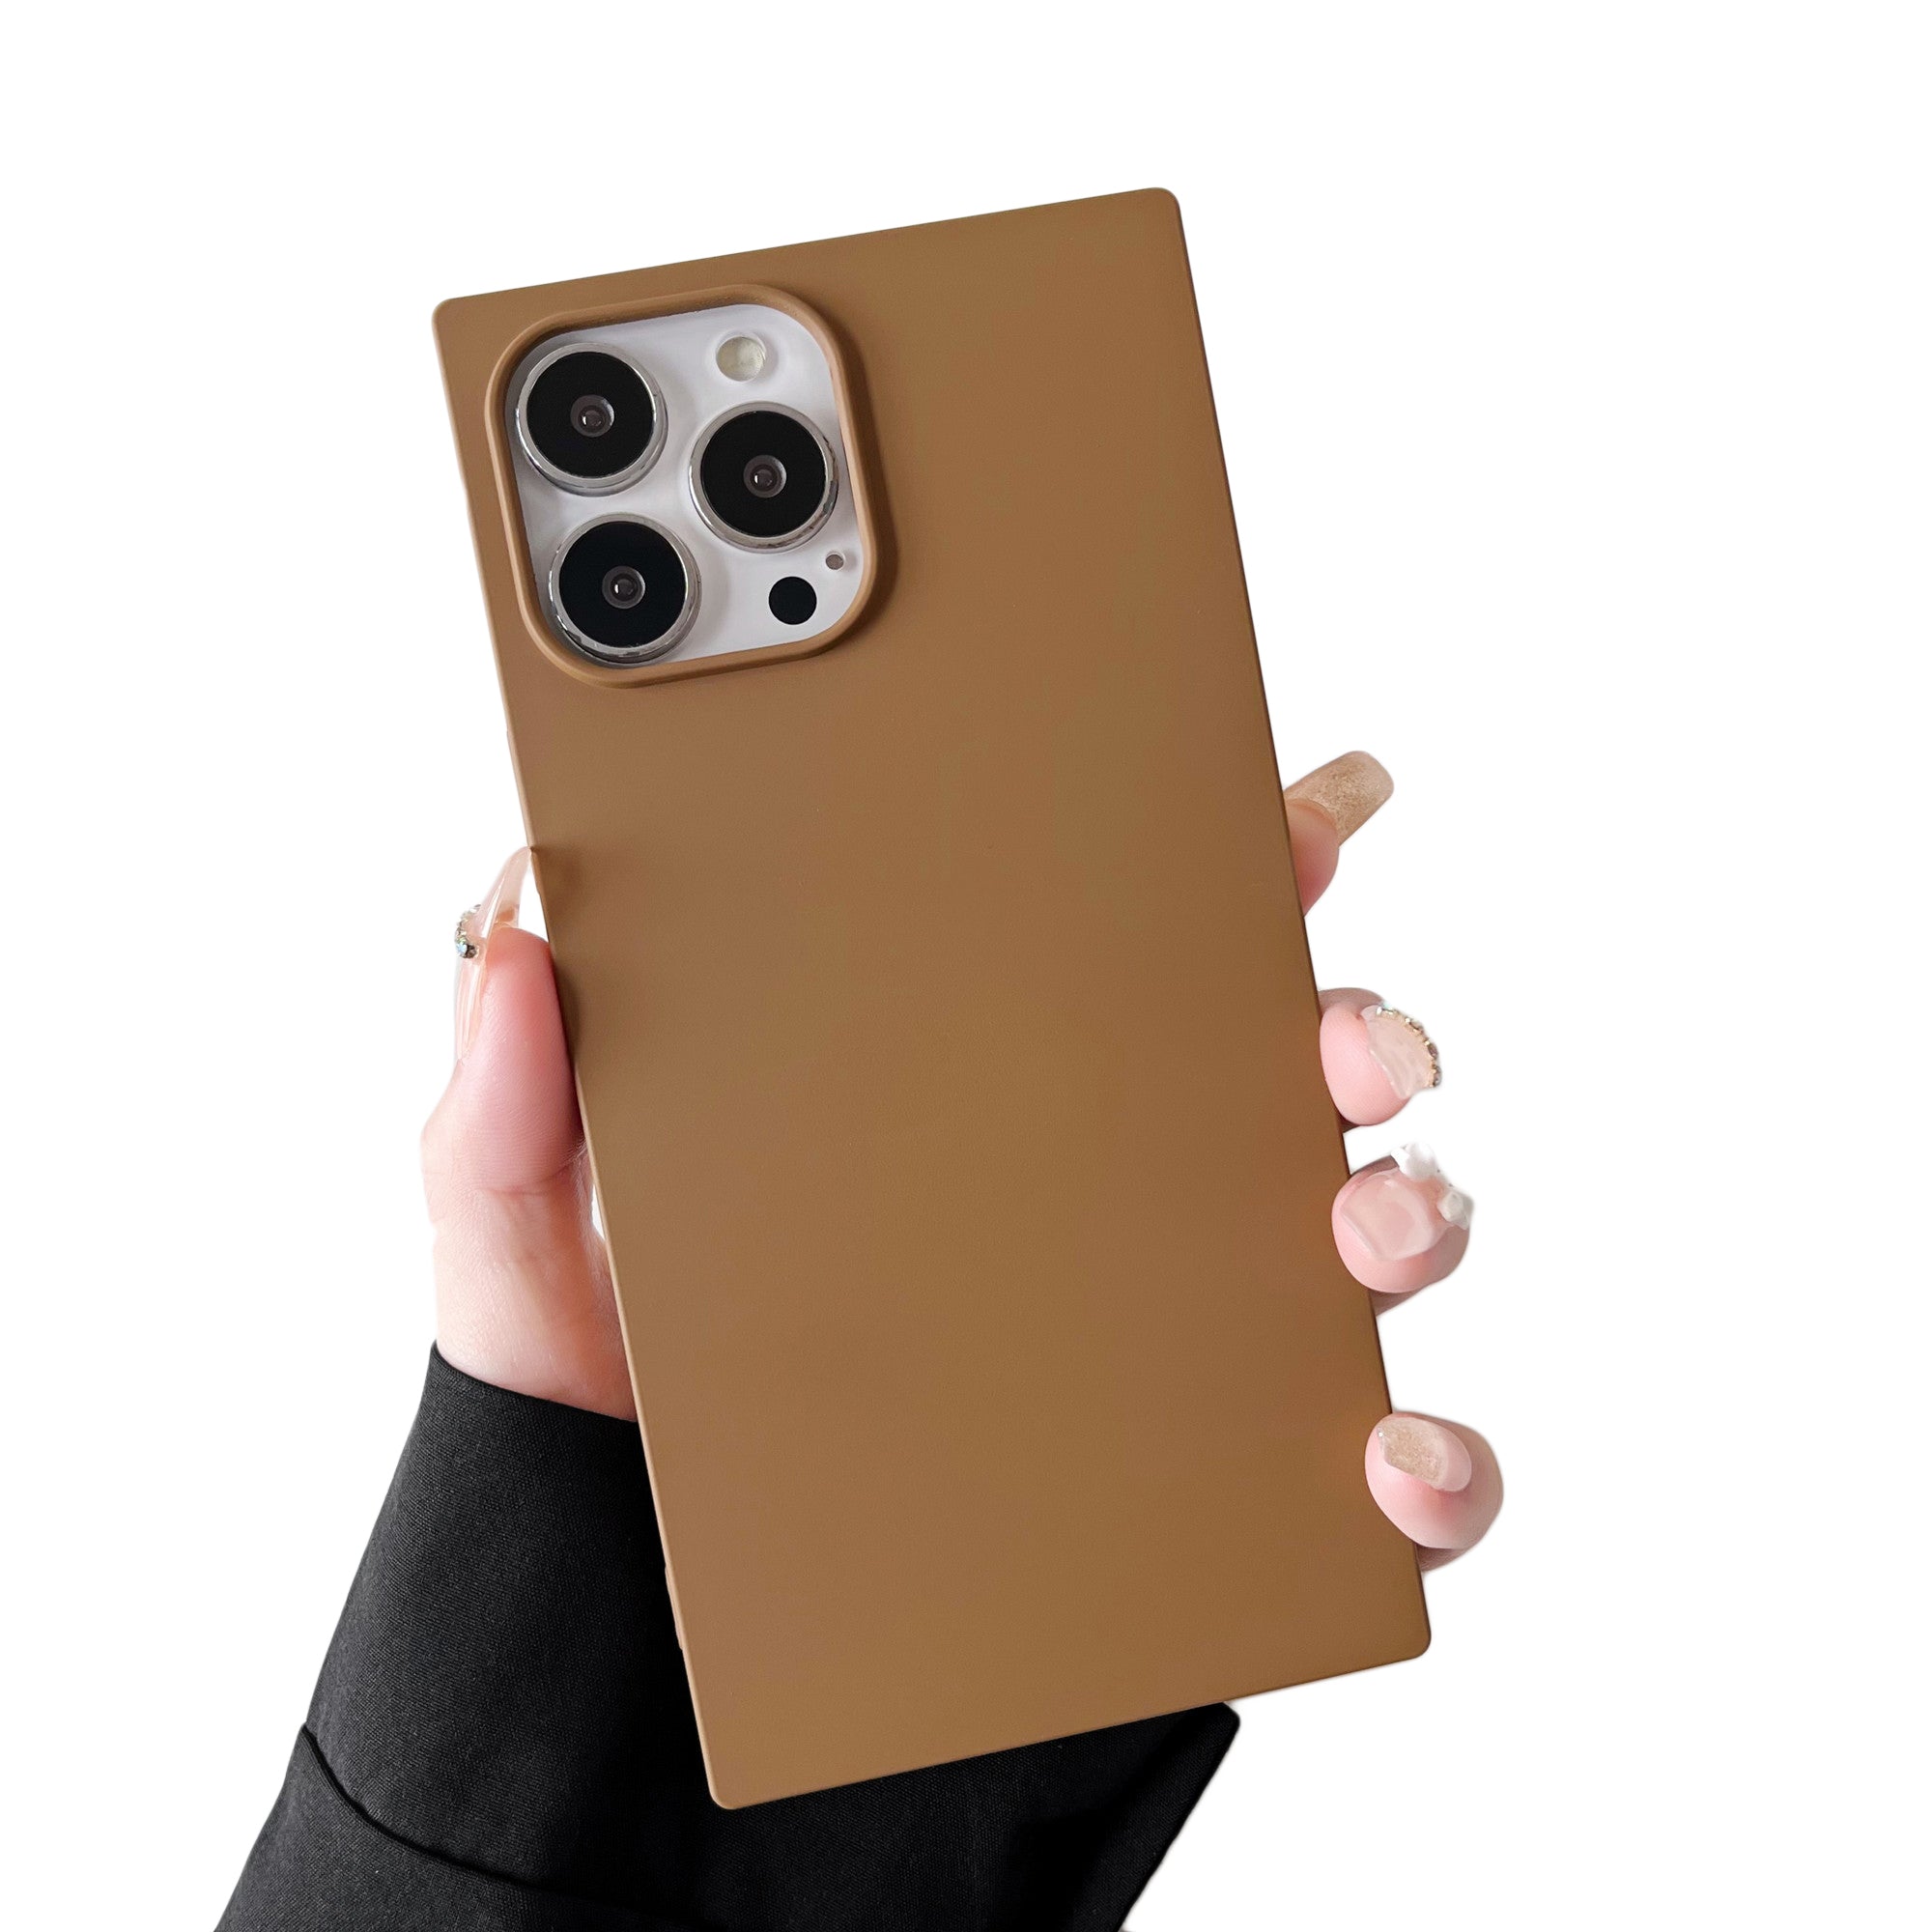 iPhone 11 Pro Case Square Silicone Neutral Color (Golden Brown)